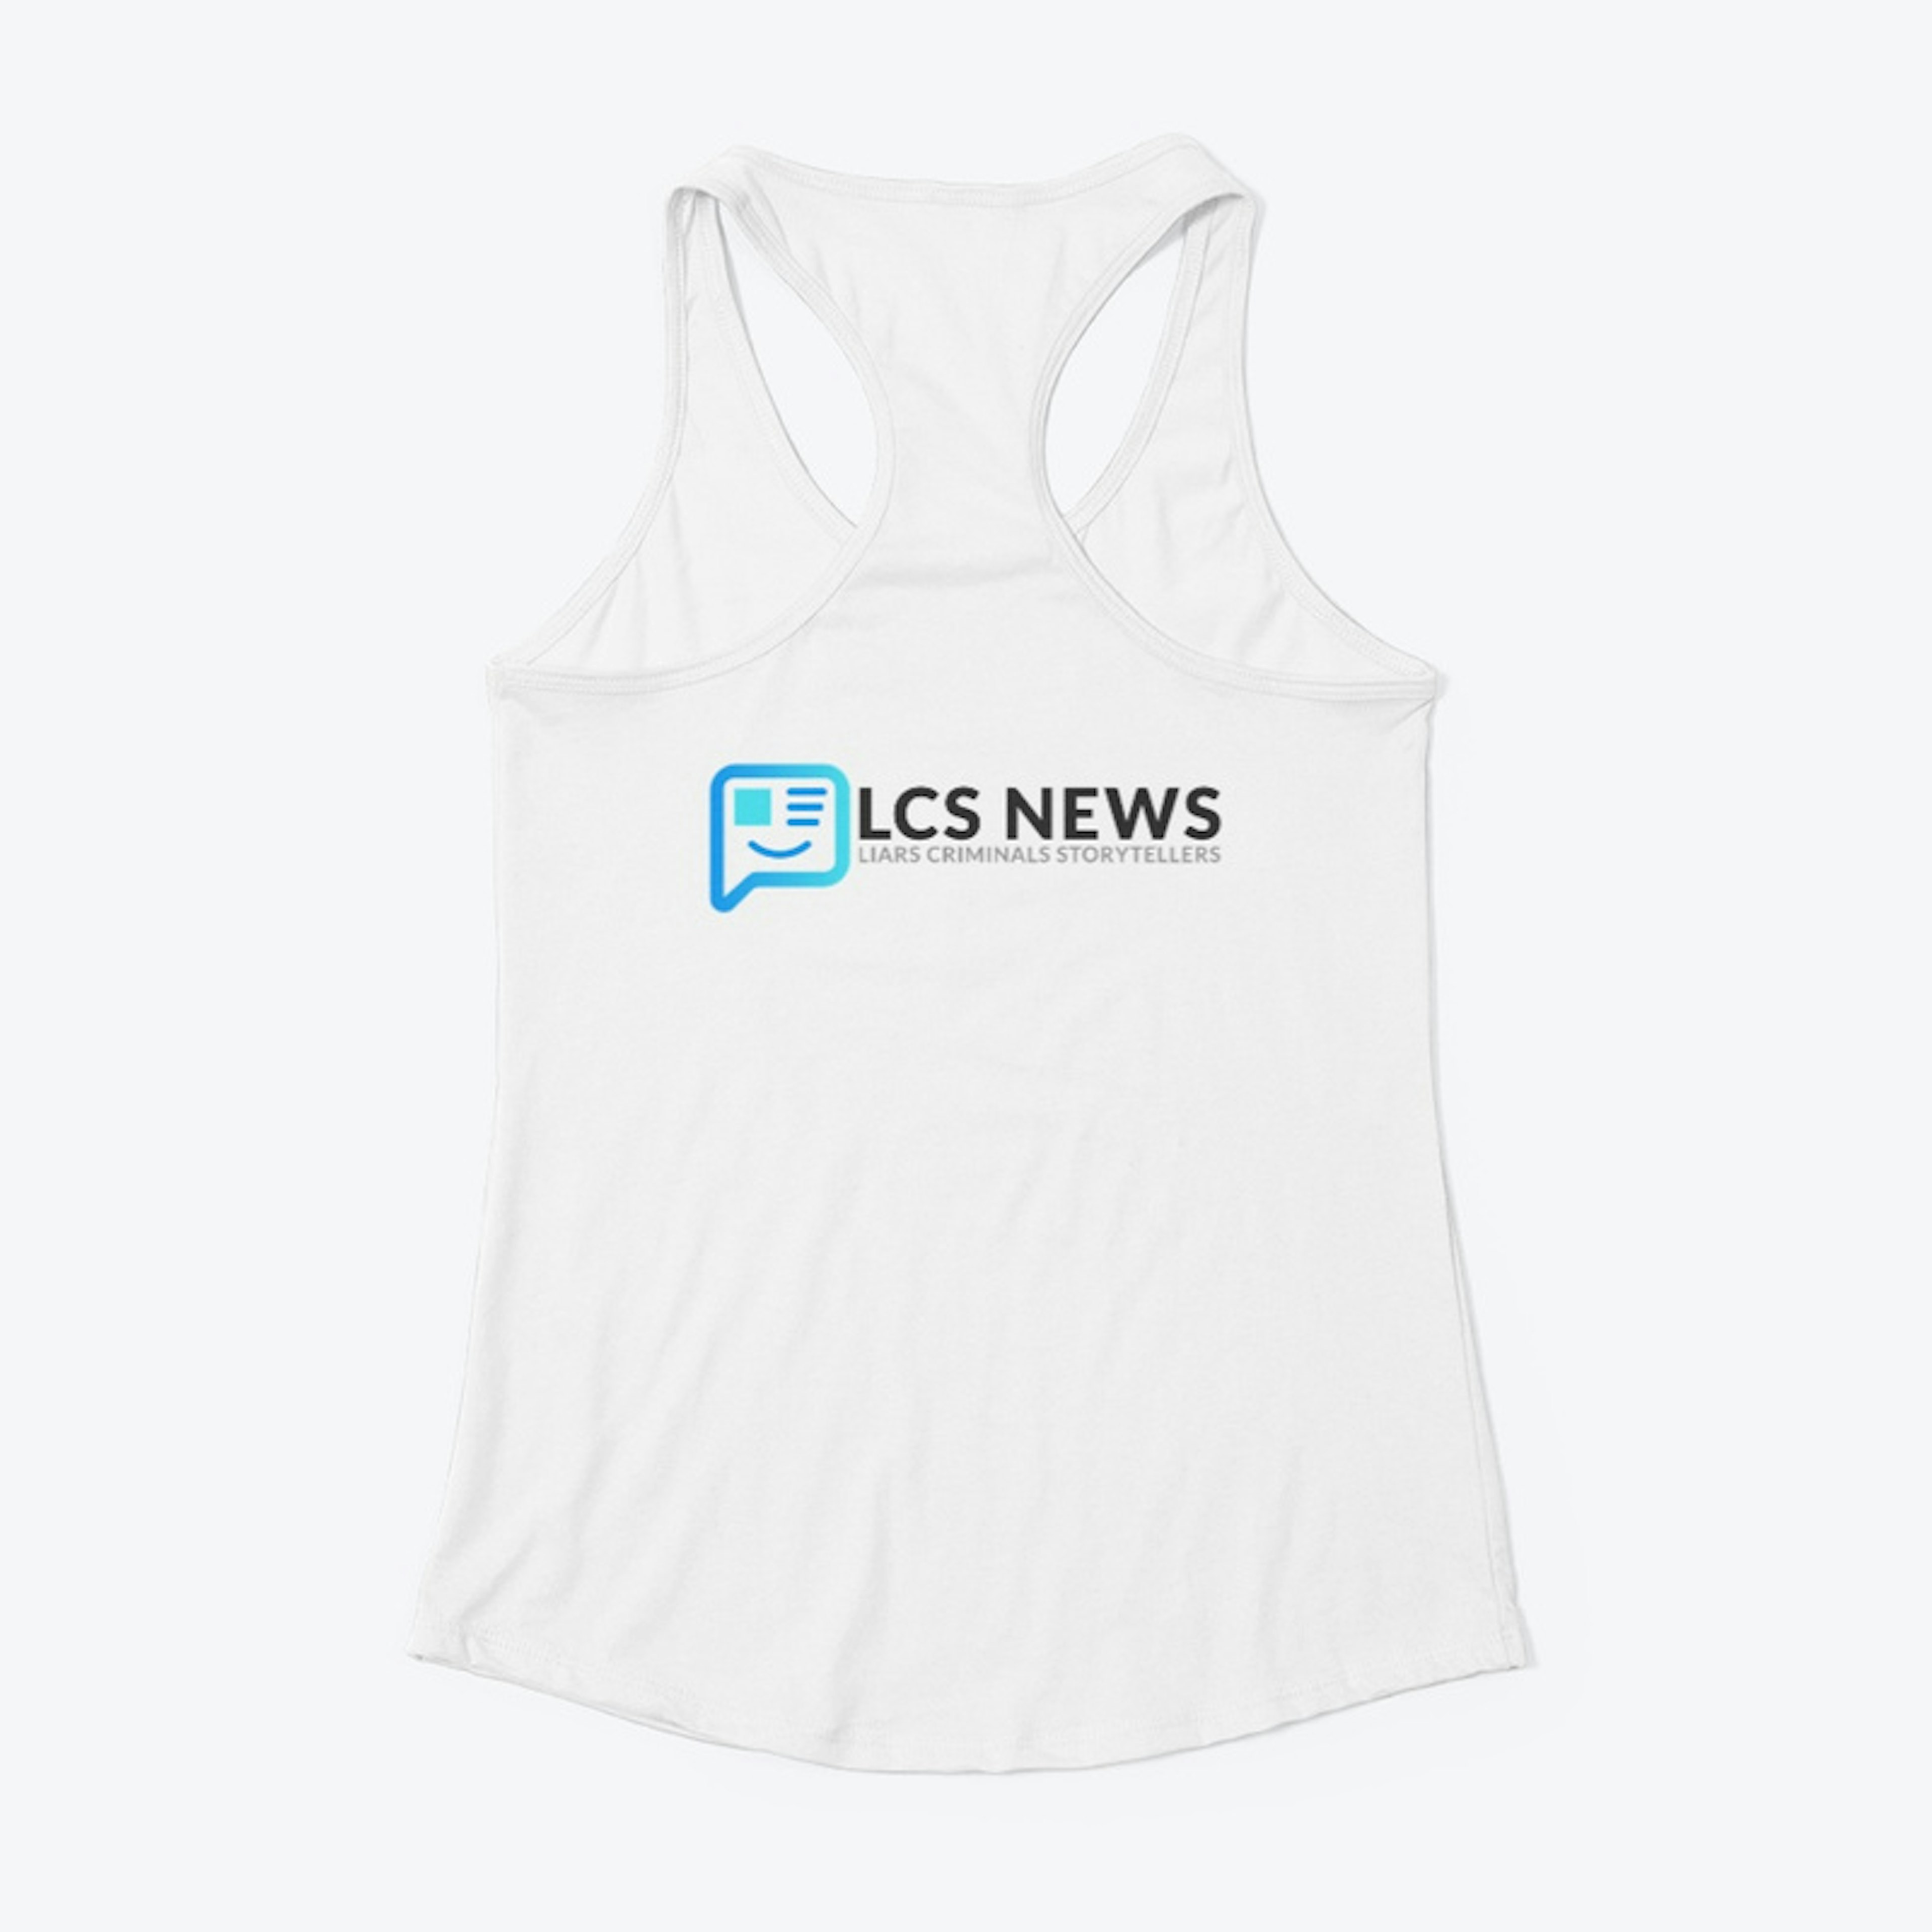 Support LCS News